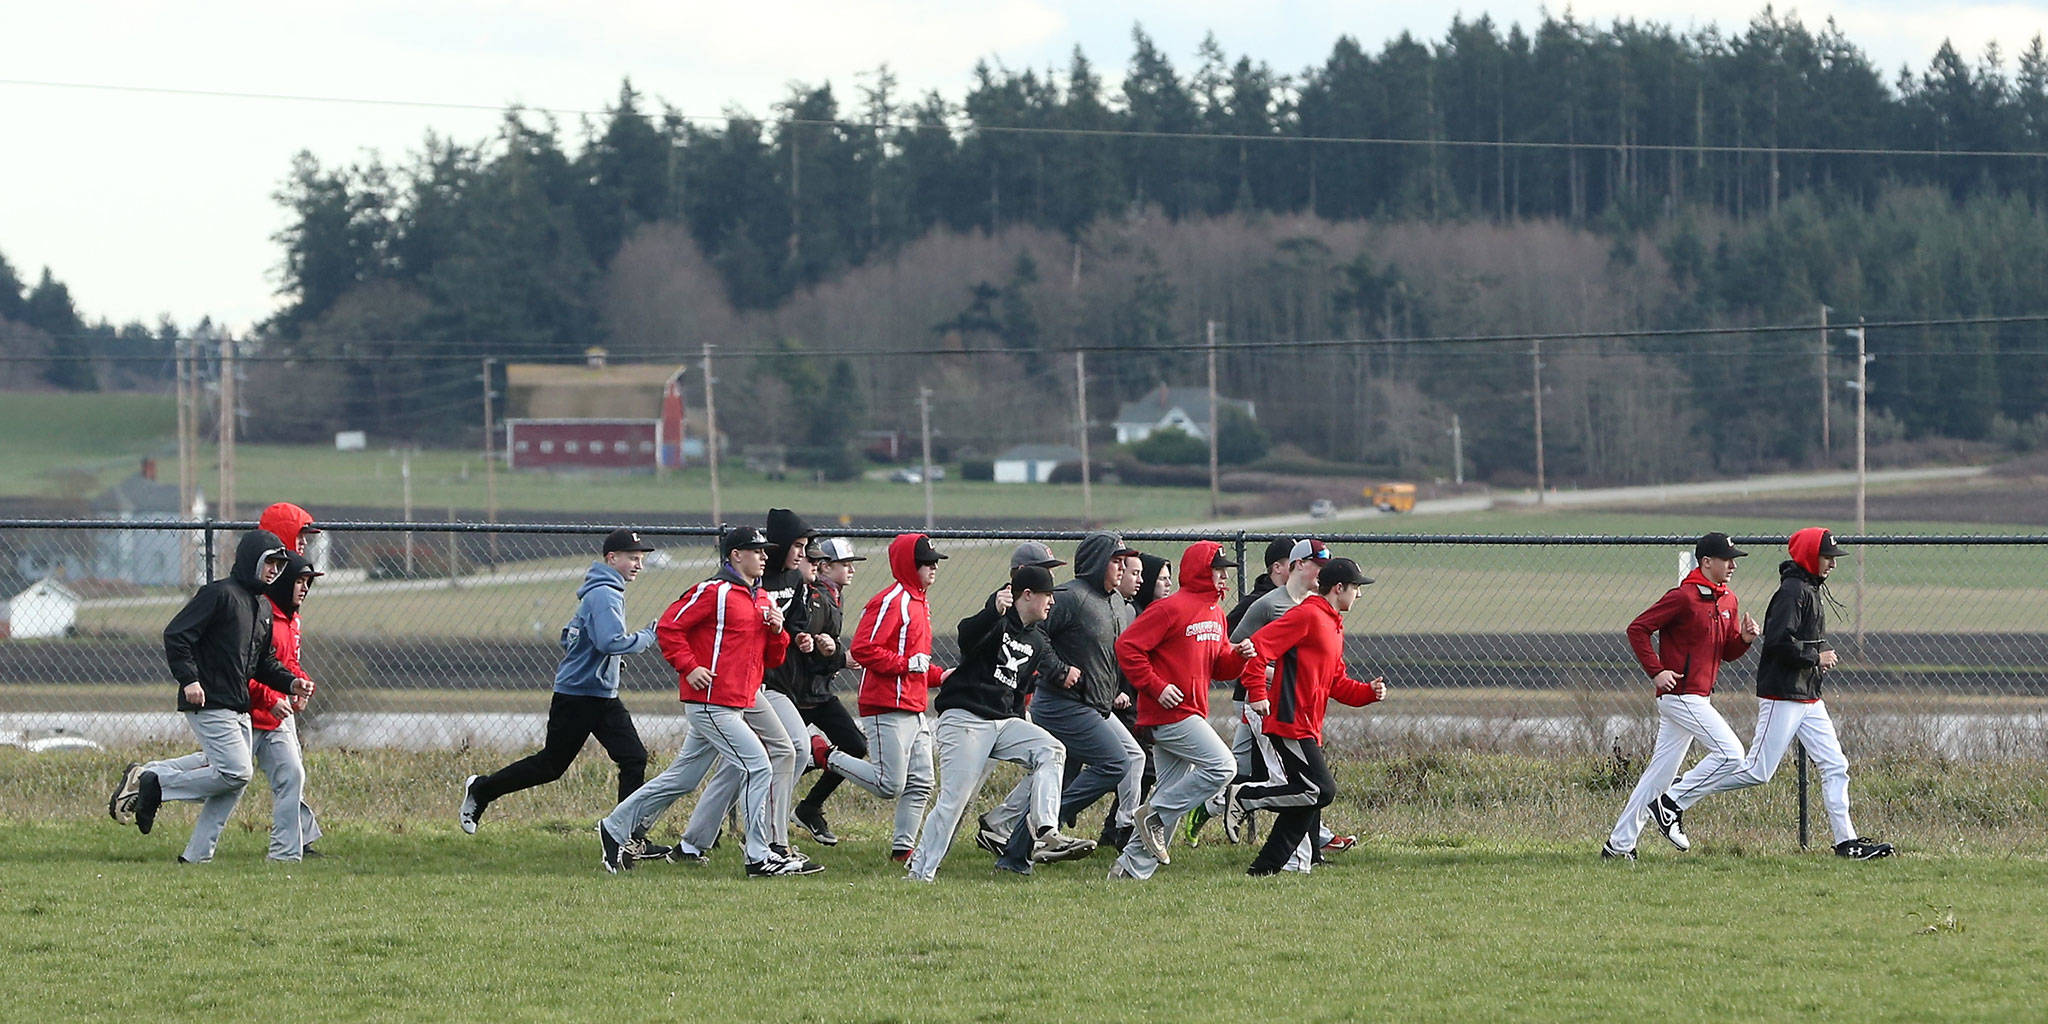 The Coupeville High School baseball team takes a lap around the field to get warmed up for the first day of practice Monday. (Photo by John Fisken)